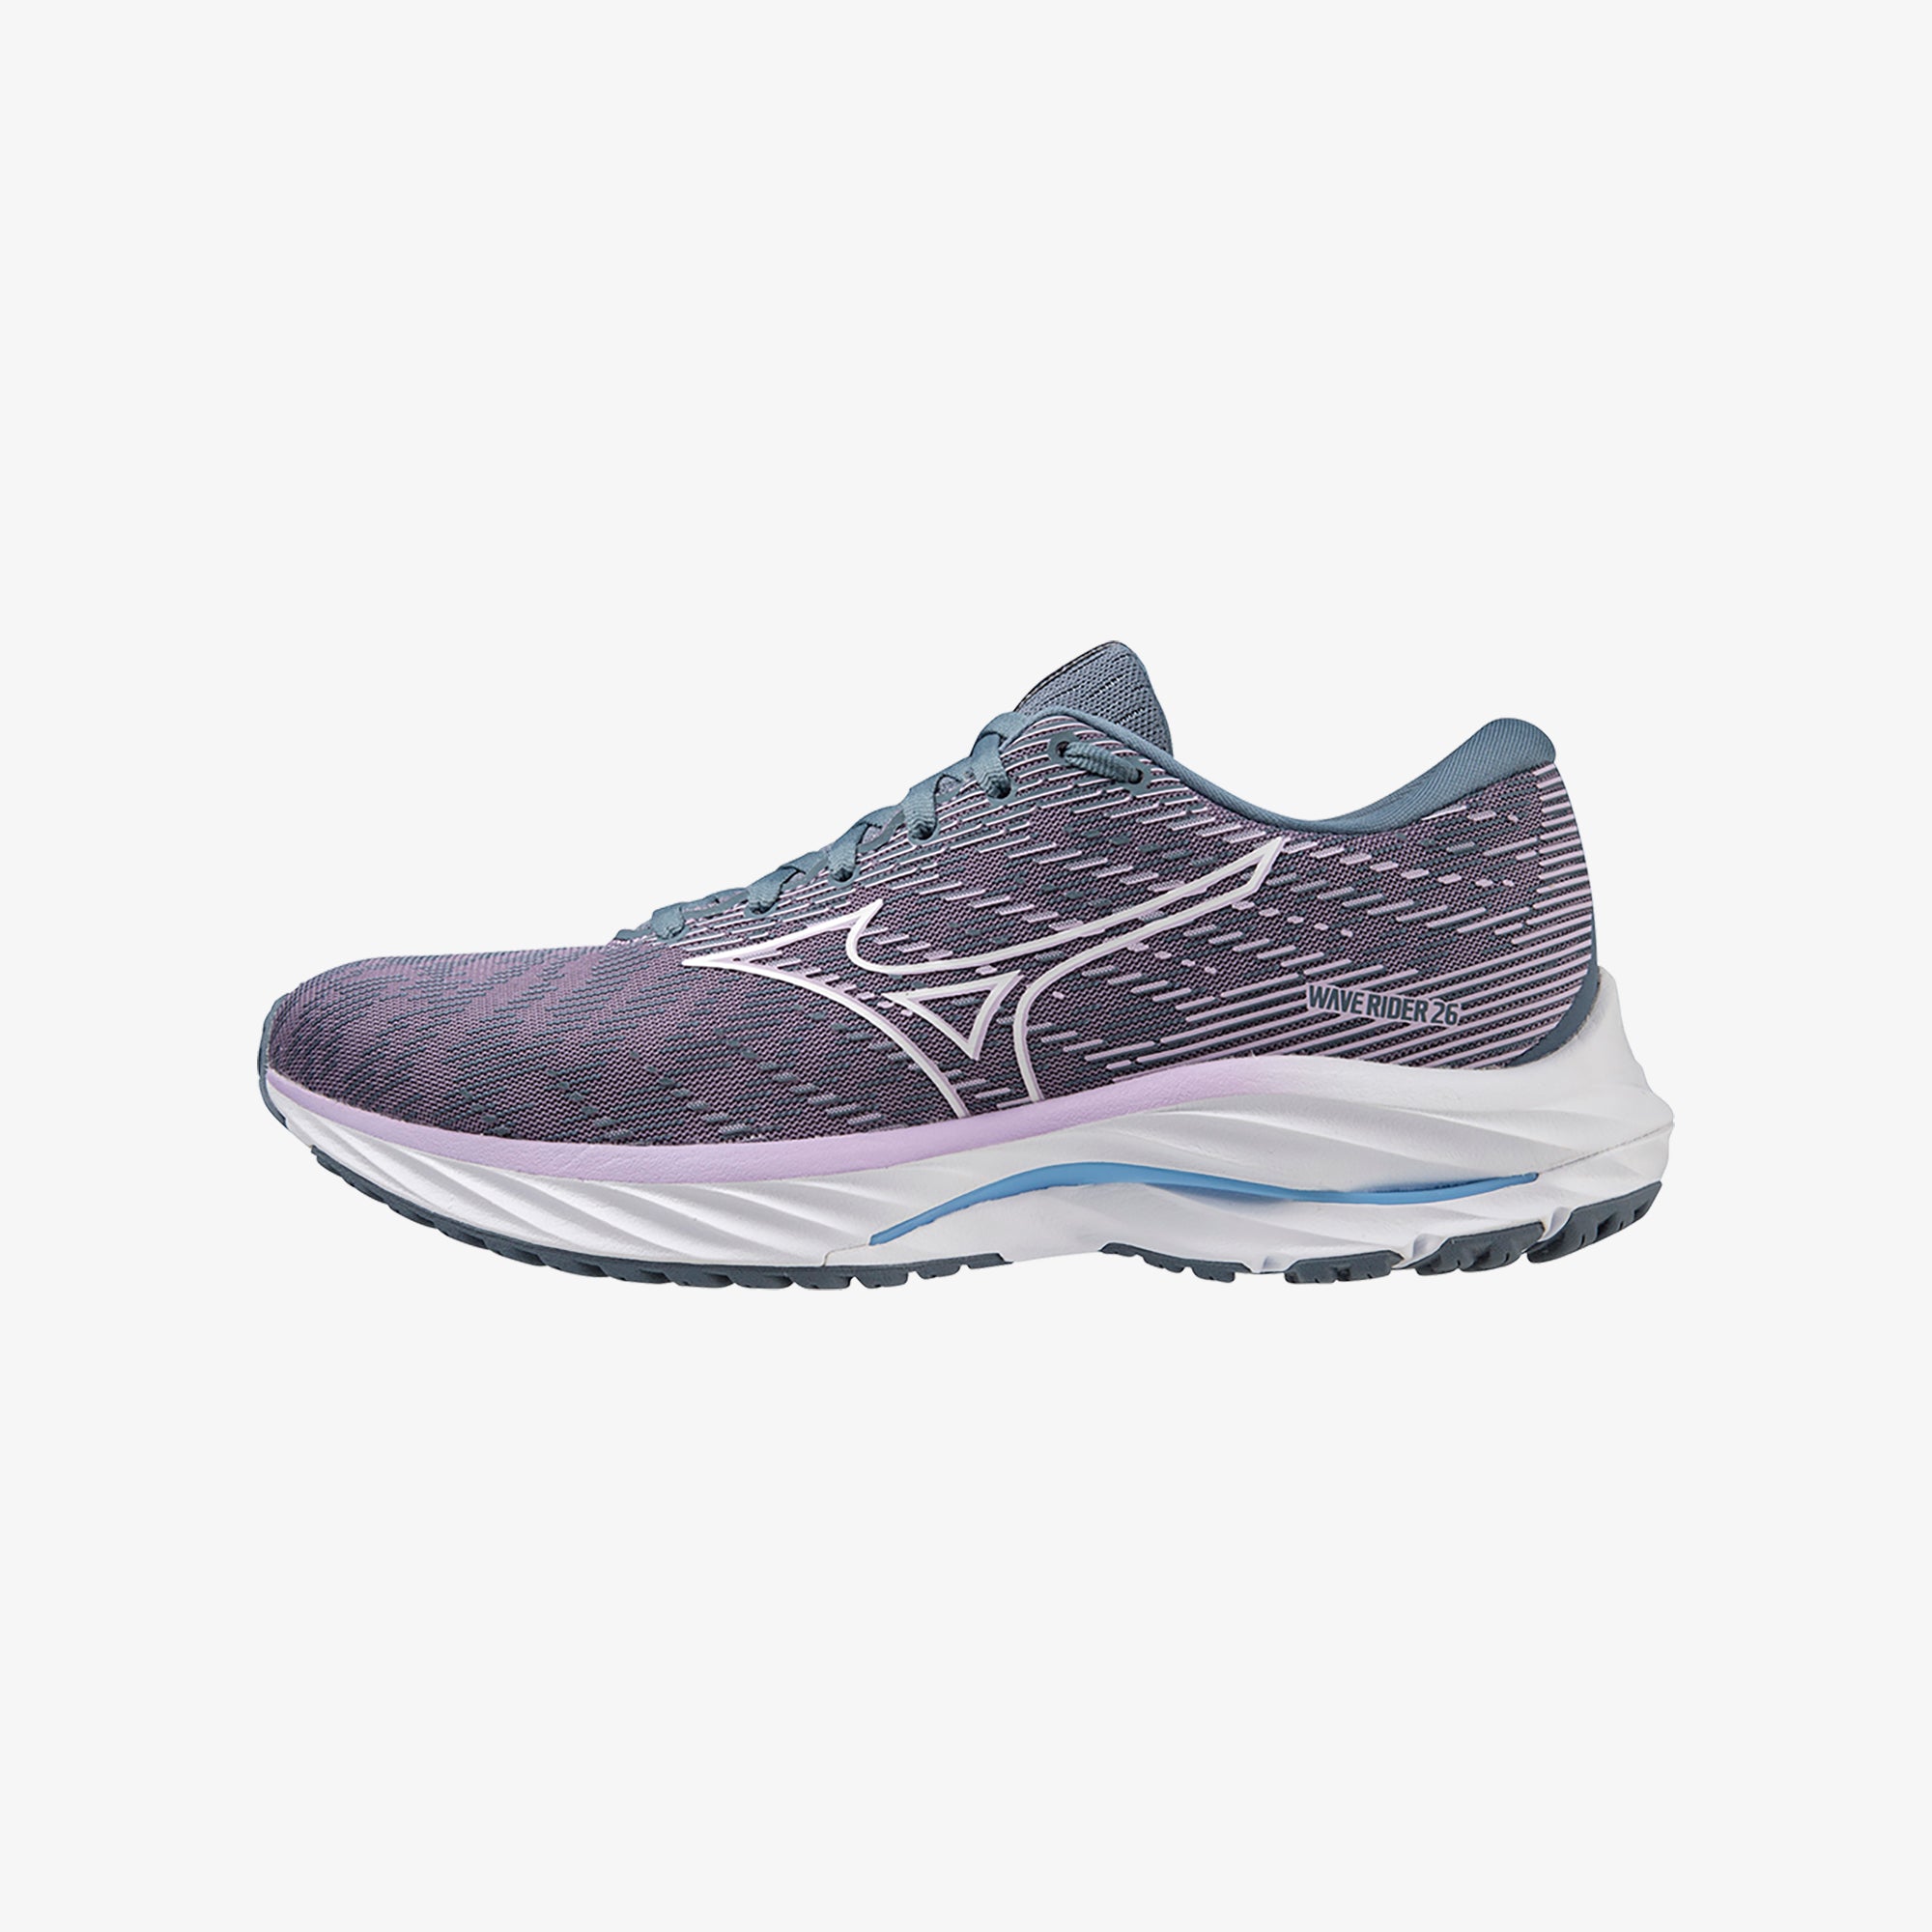 Mizuno Wave Rider 25 Performance Review - Believe in the Run